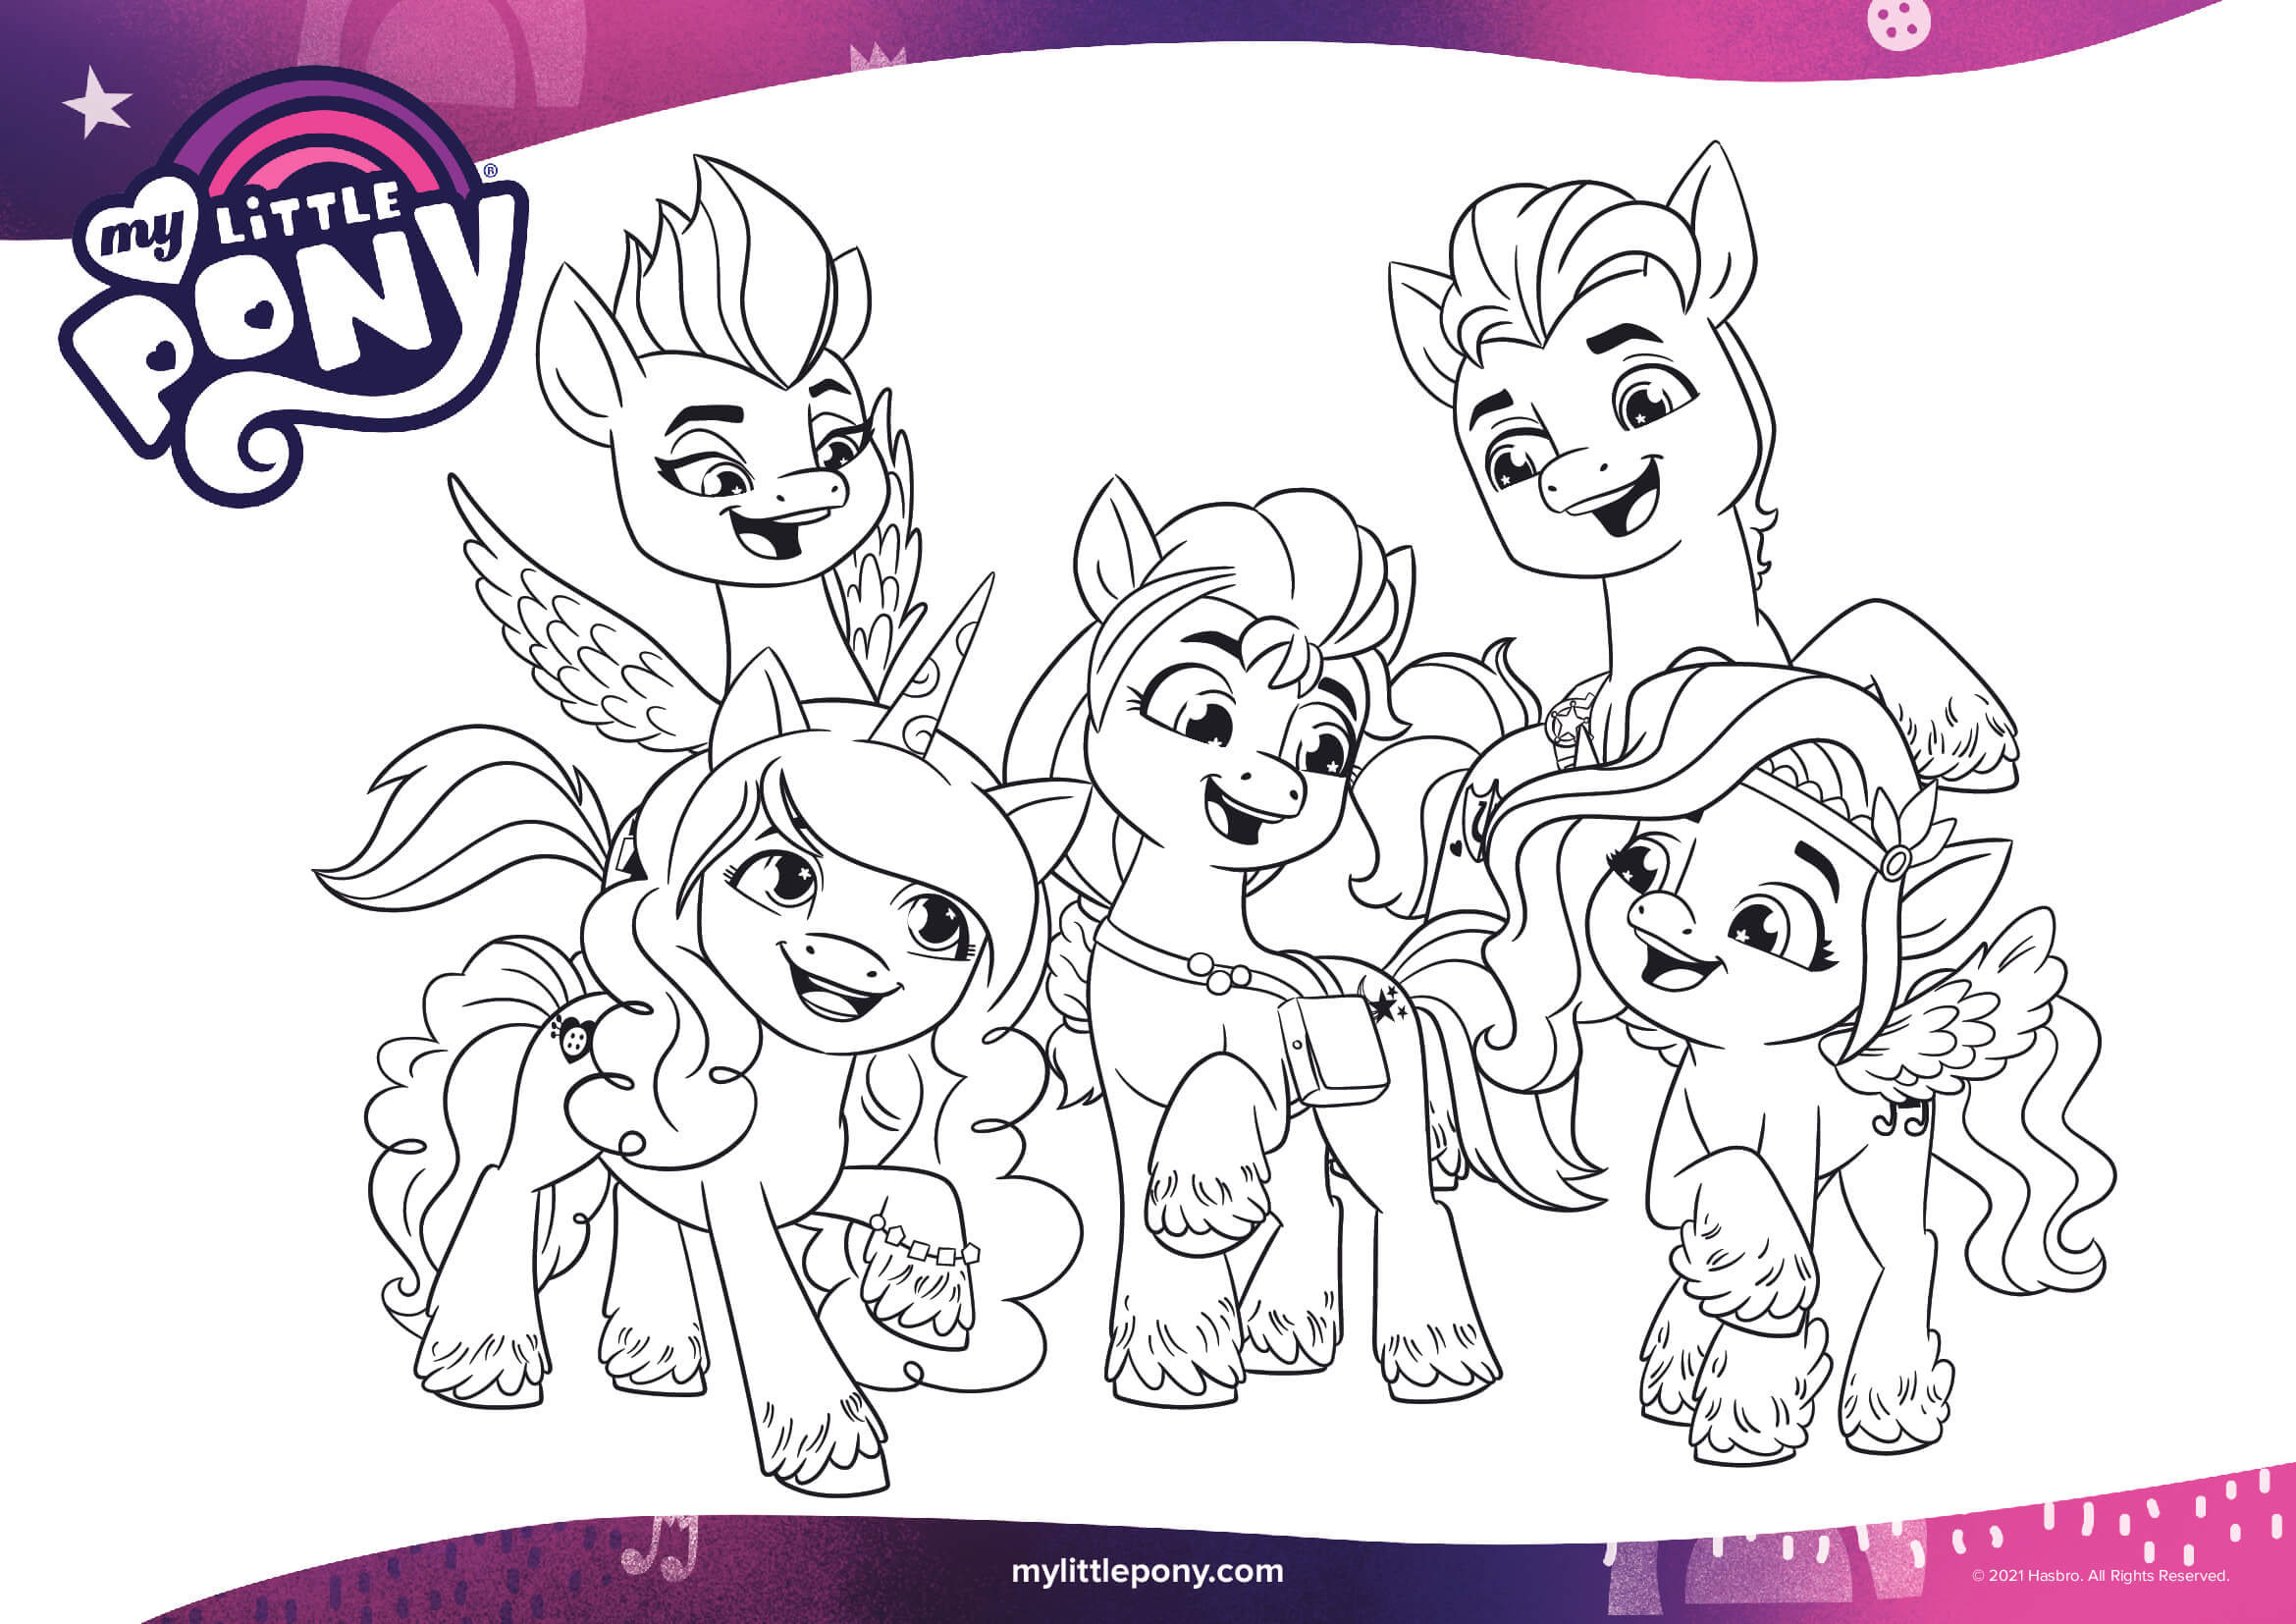 My Little Pony A New Generation Mlp 5 Coloring Page